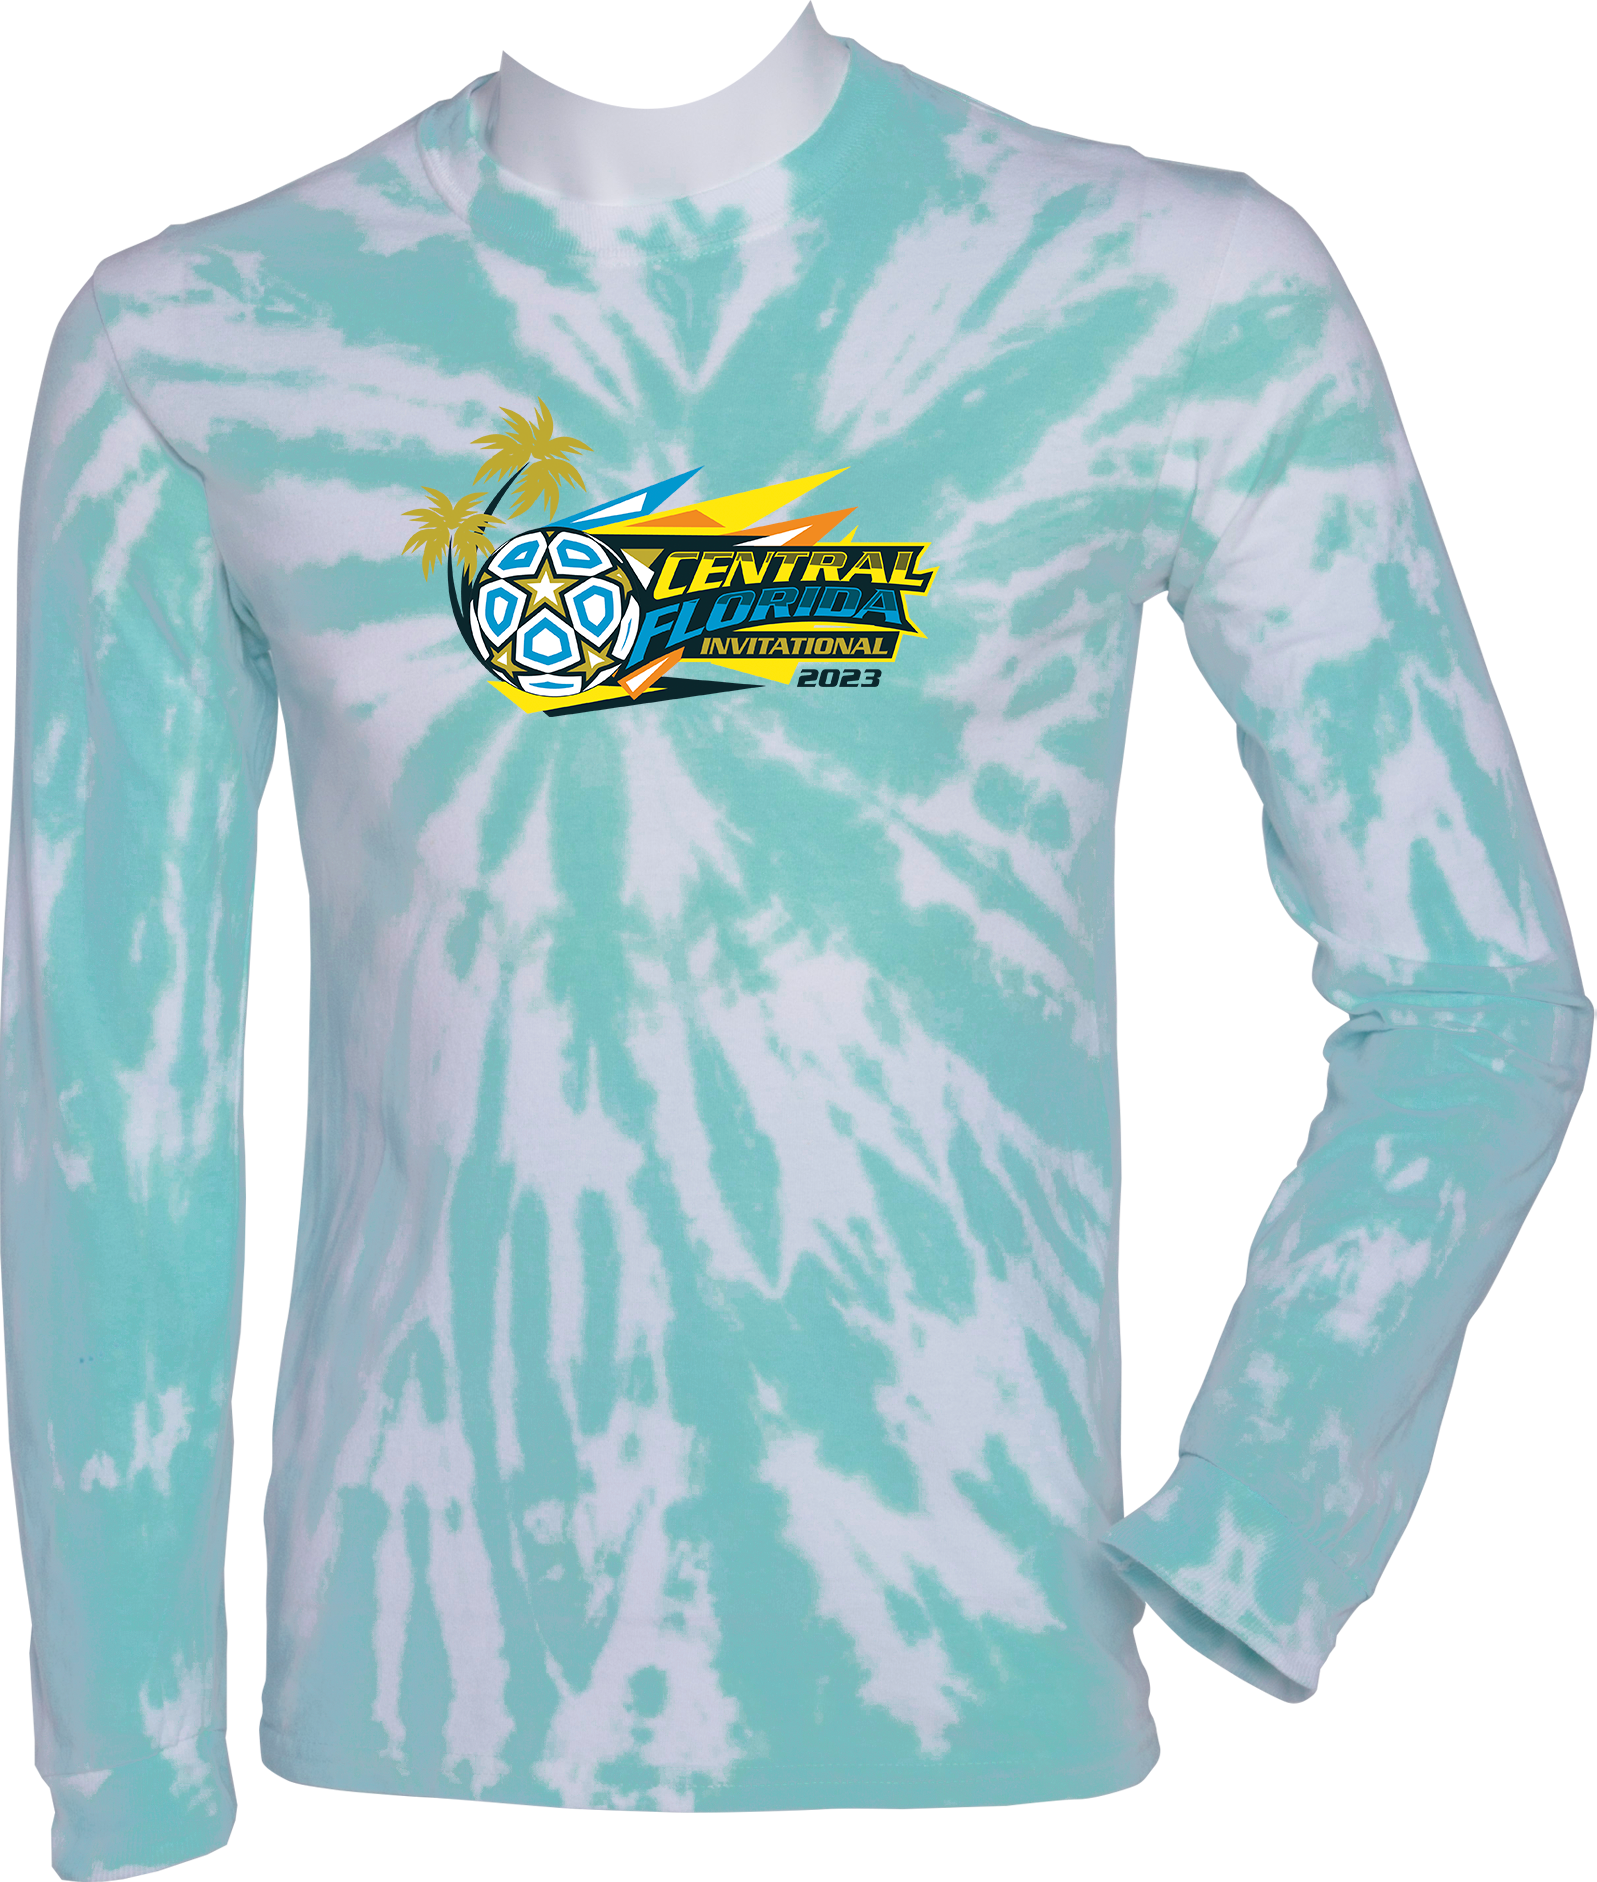 TIE-DYE LONG SLEEVES - 2023 Central Florida Invitational